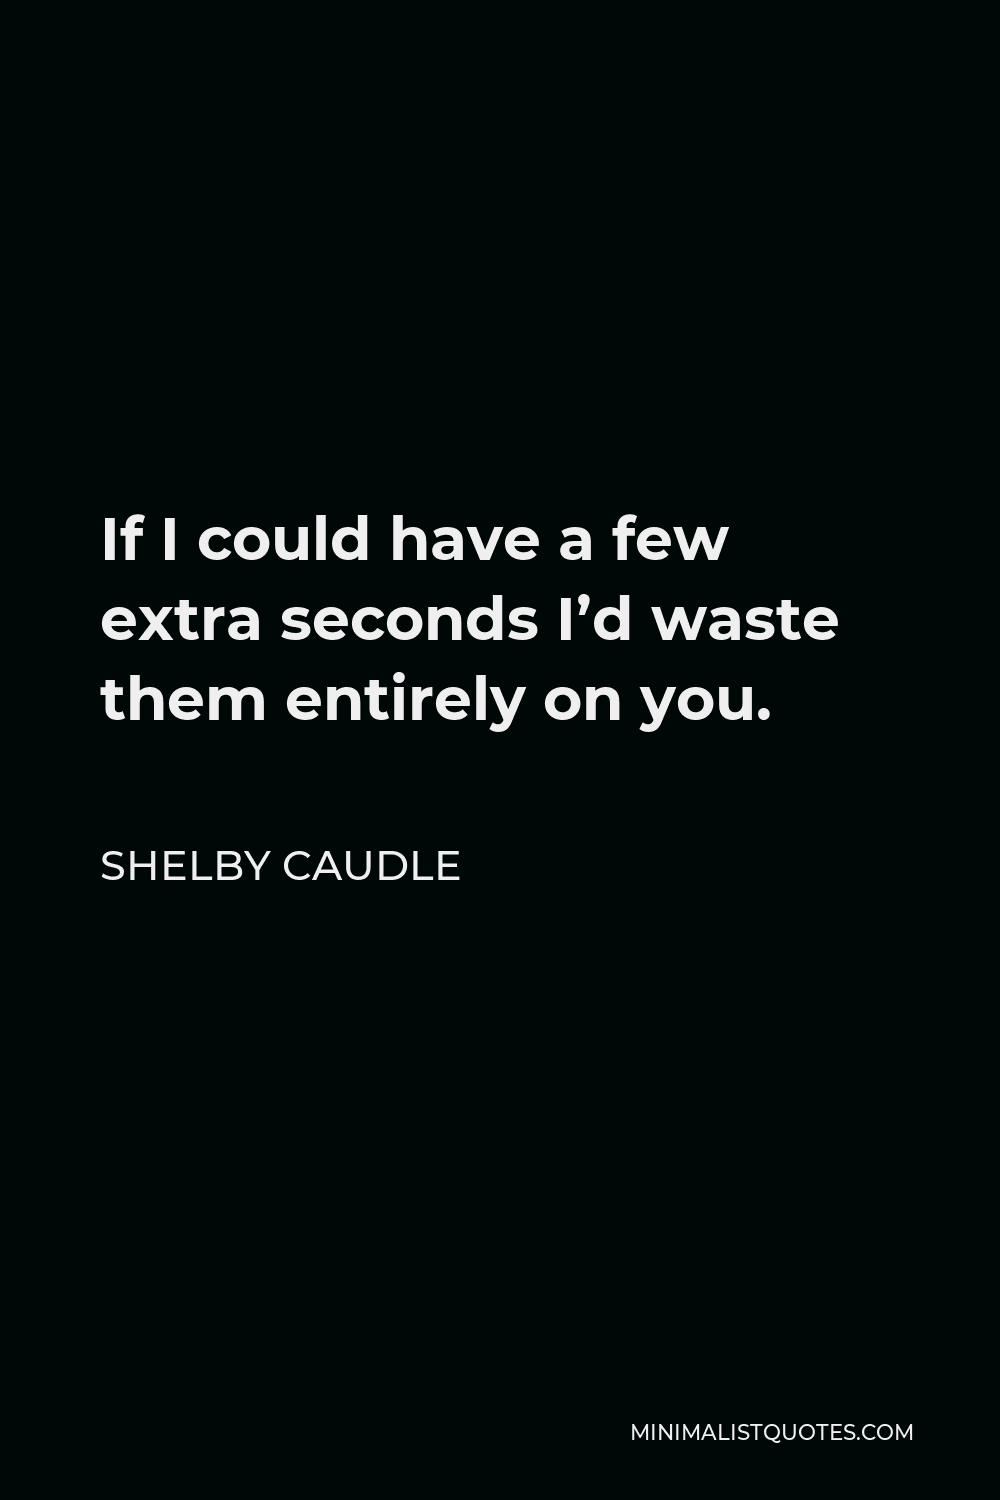 Shelby Caudle Quote - If I could have a few extra seconds I’d waste them entirely on you.